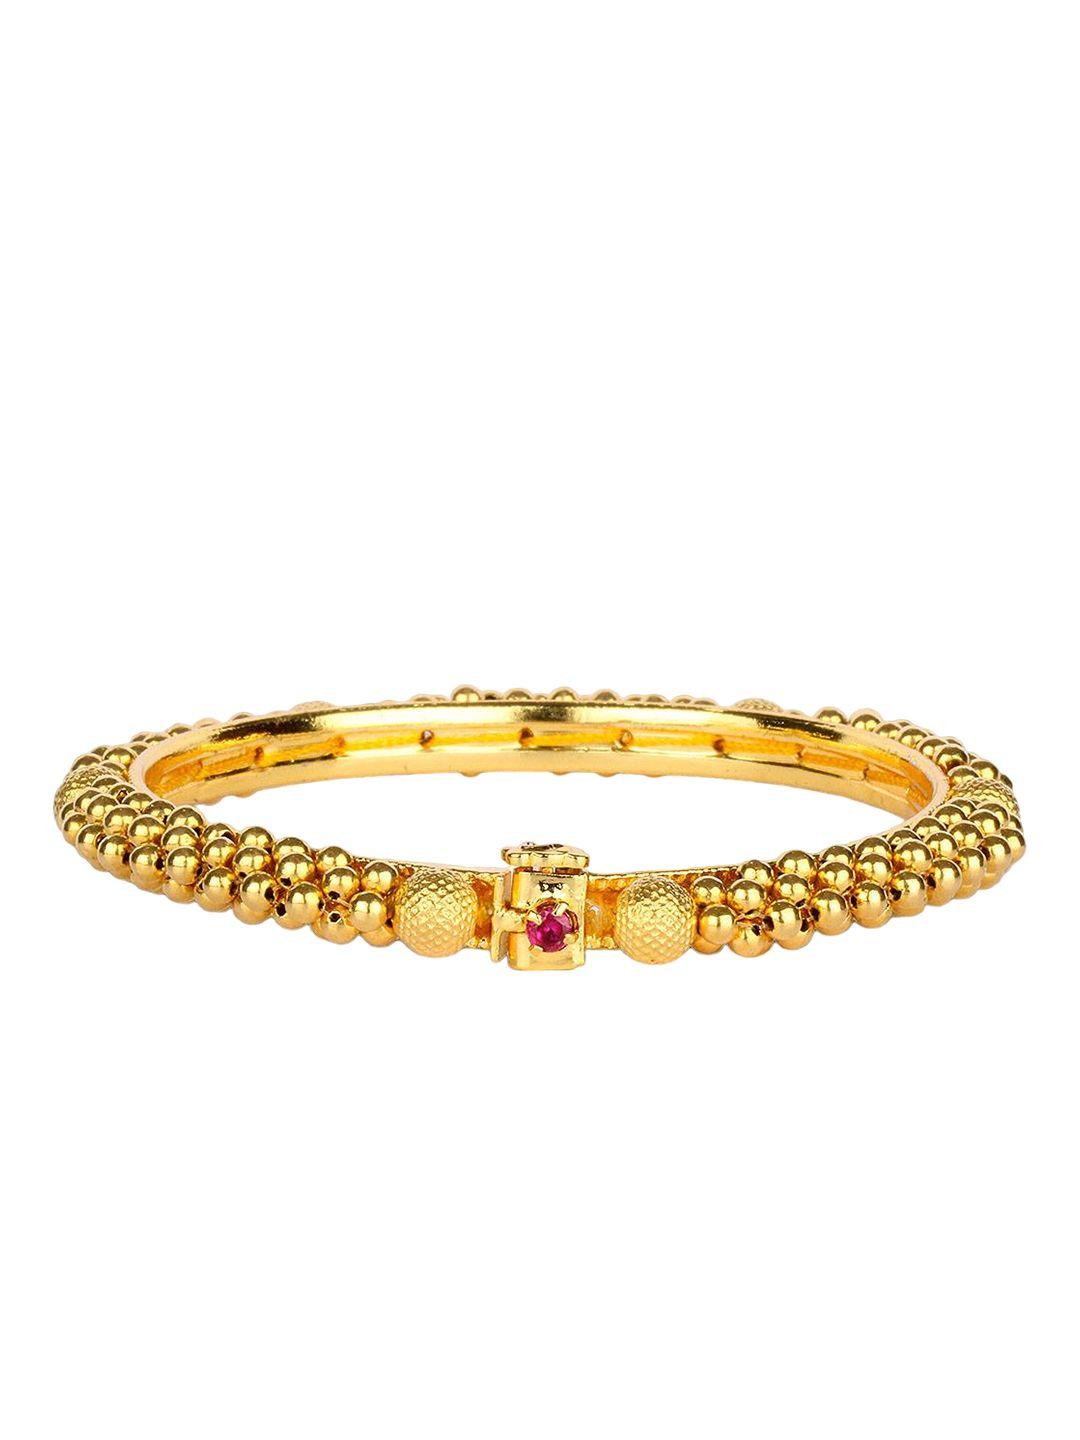 candere a kalyan jewellers company 22kt gold tushi bangle - 2.37 gm